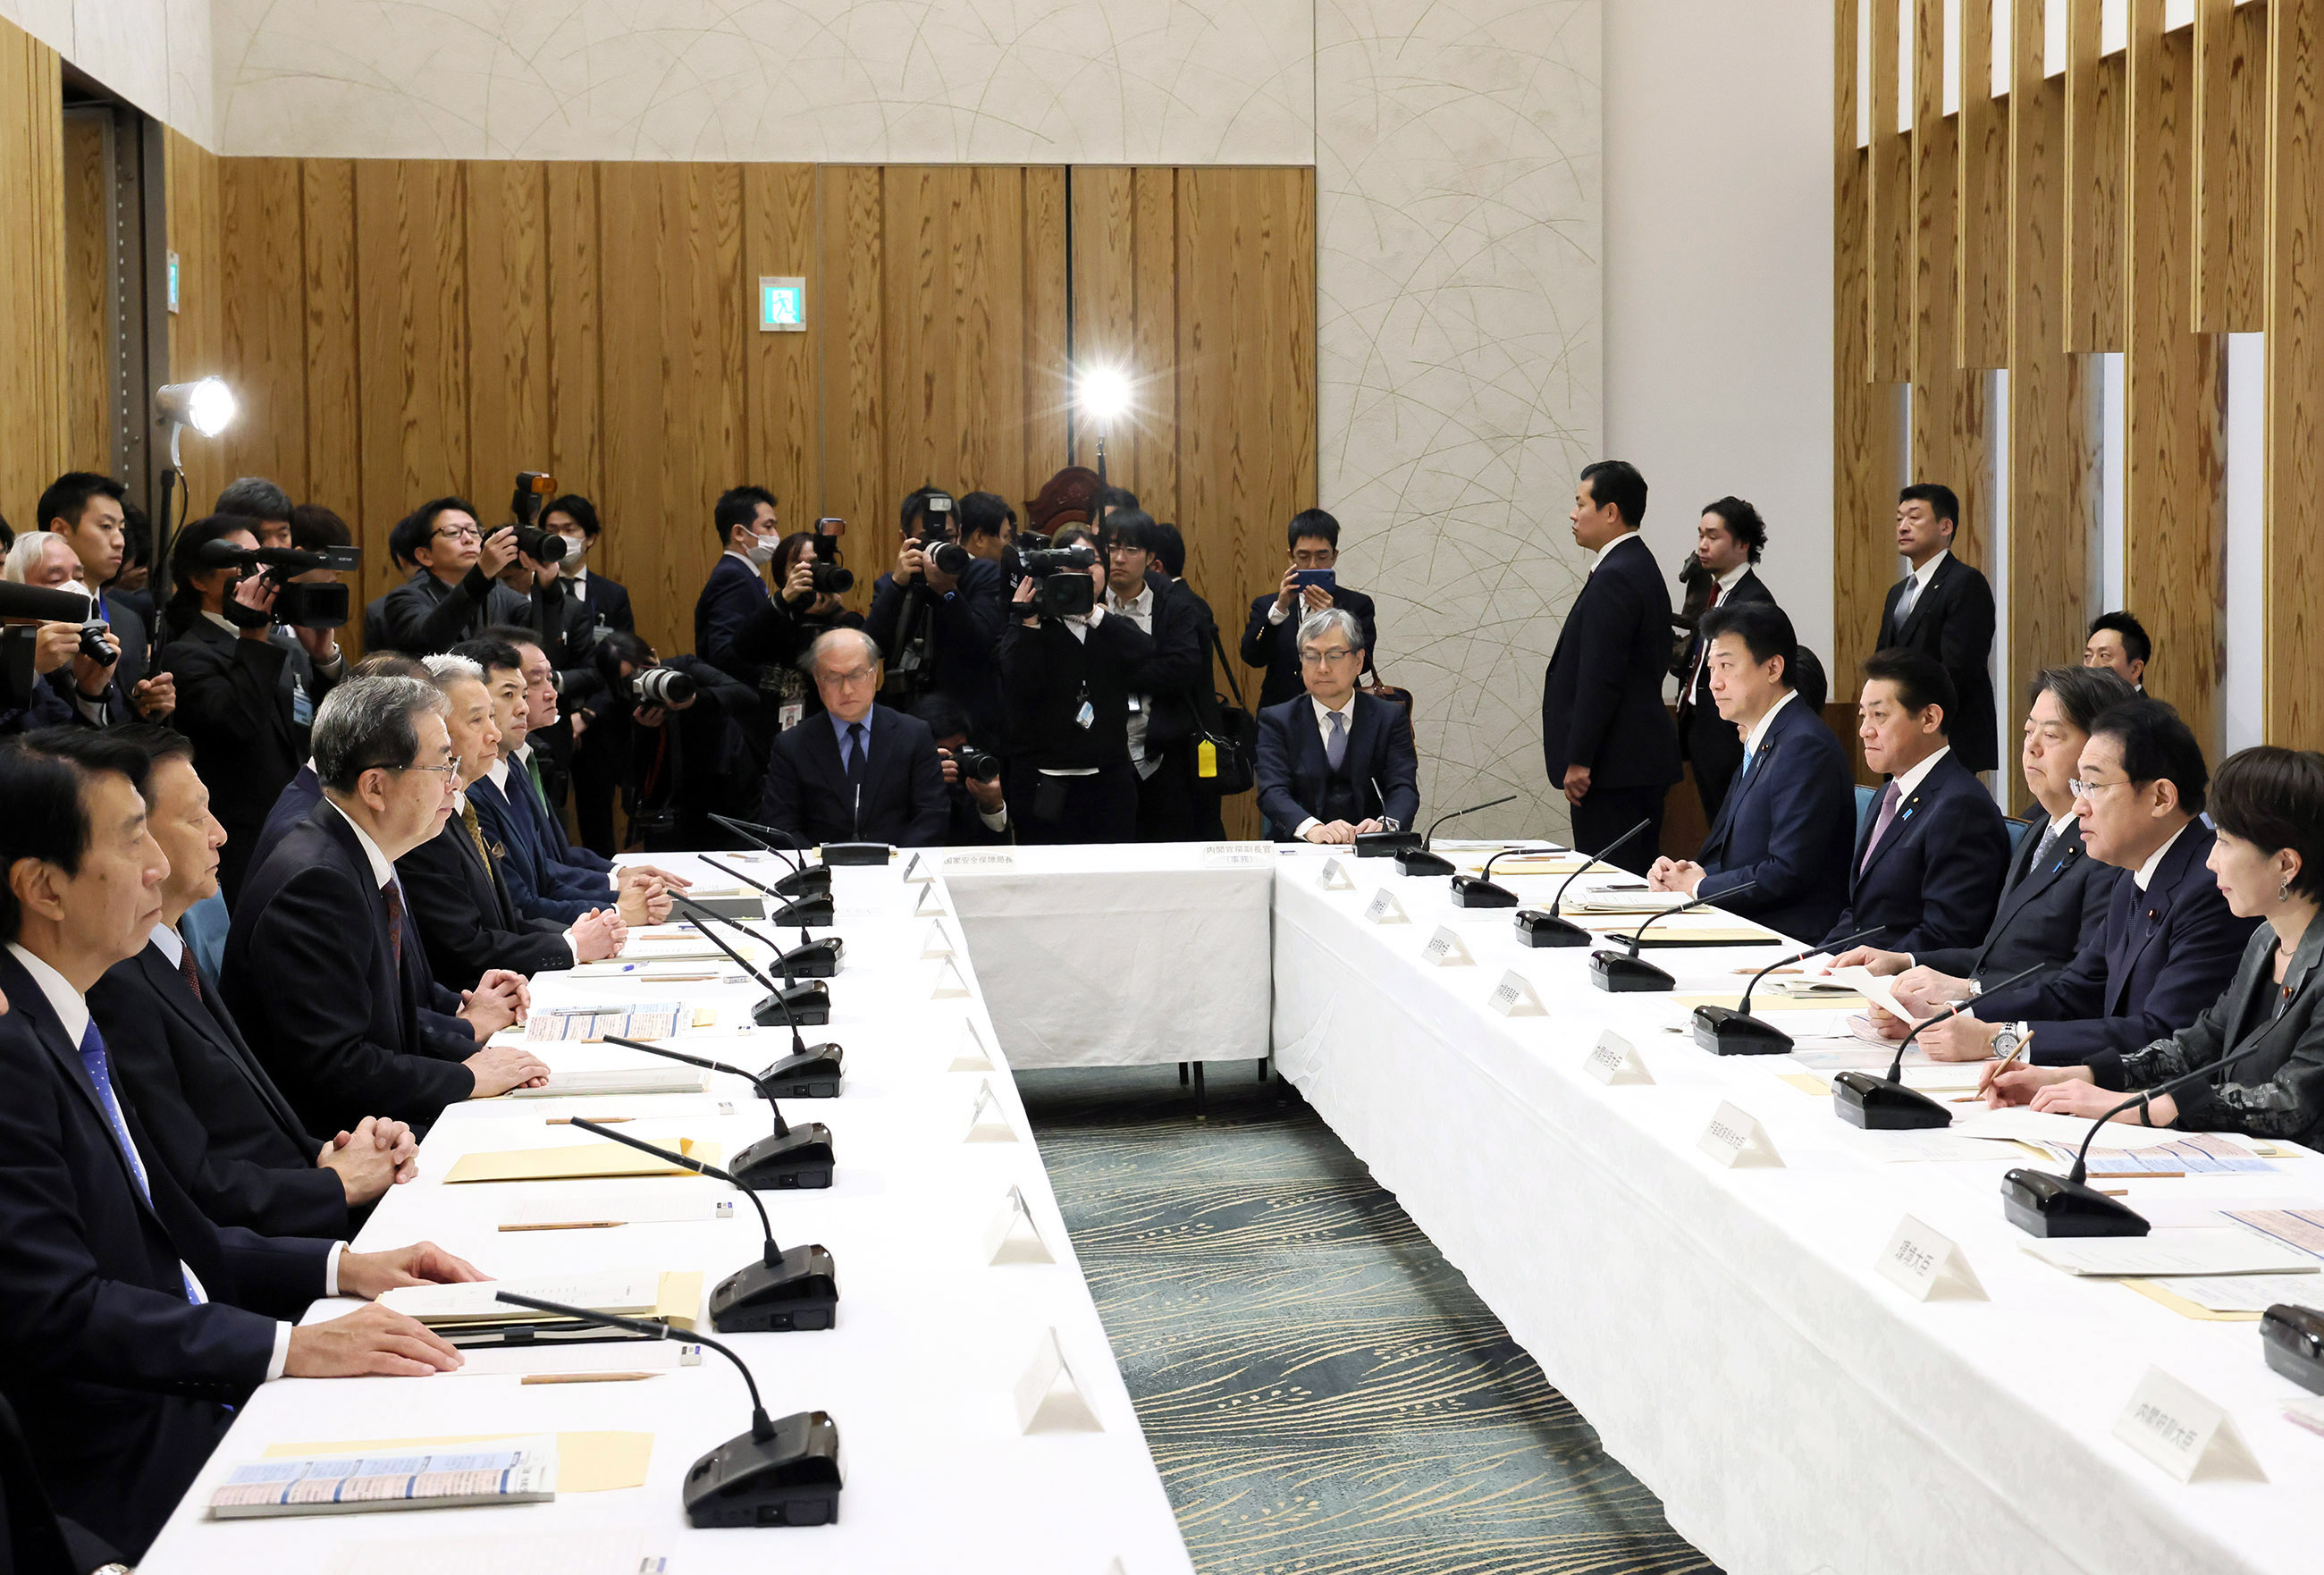 Prime Minister wrapping up a meeting (2)